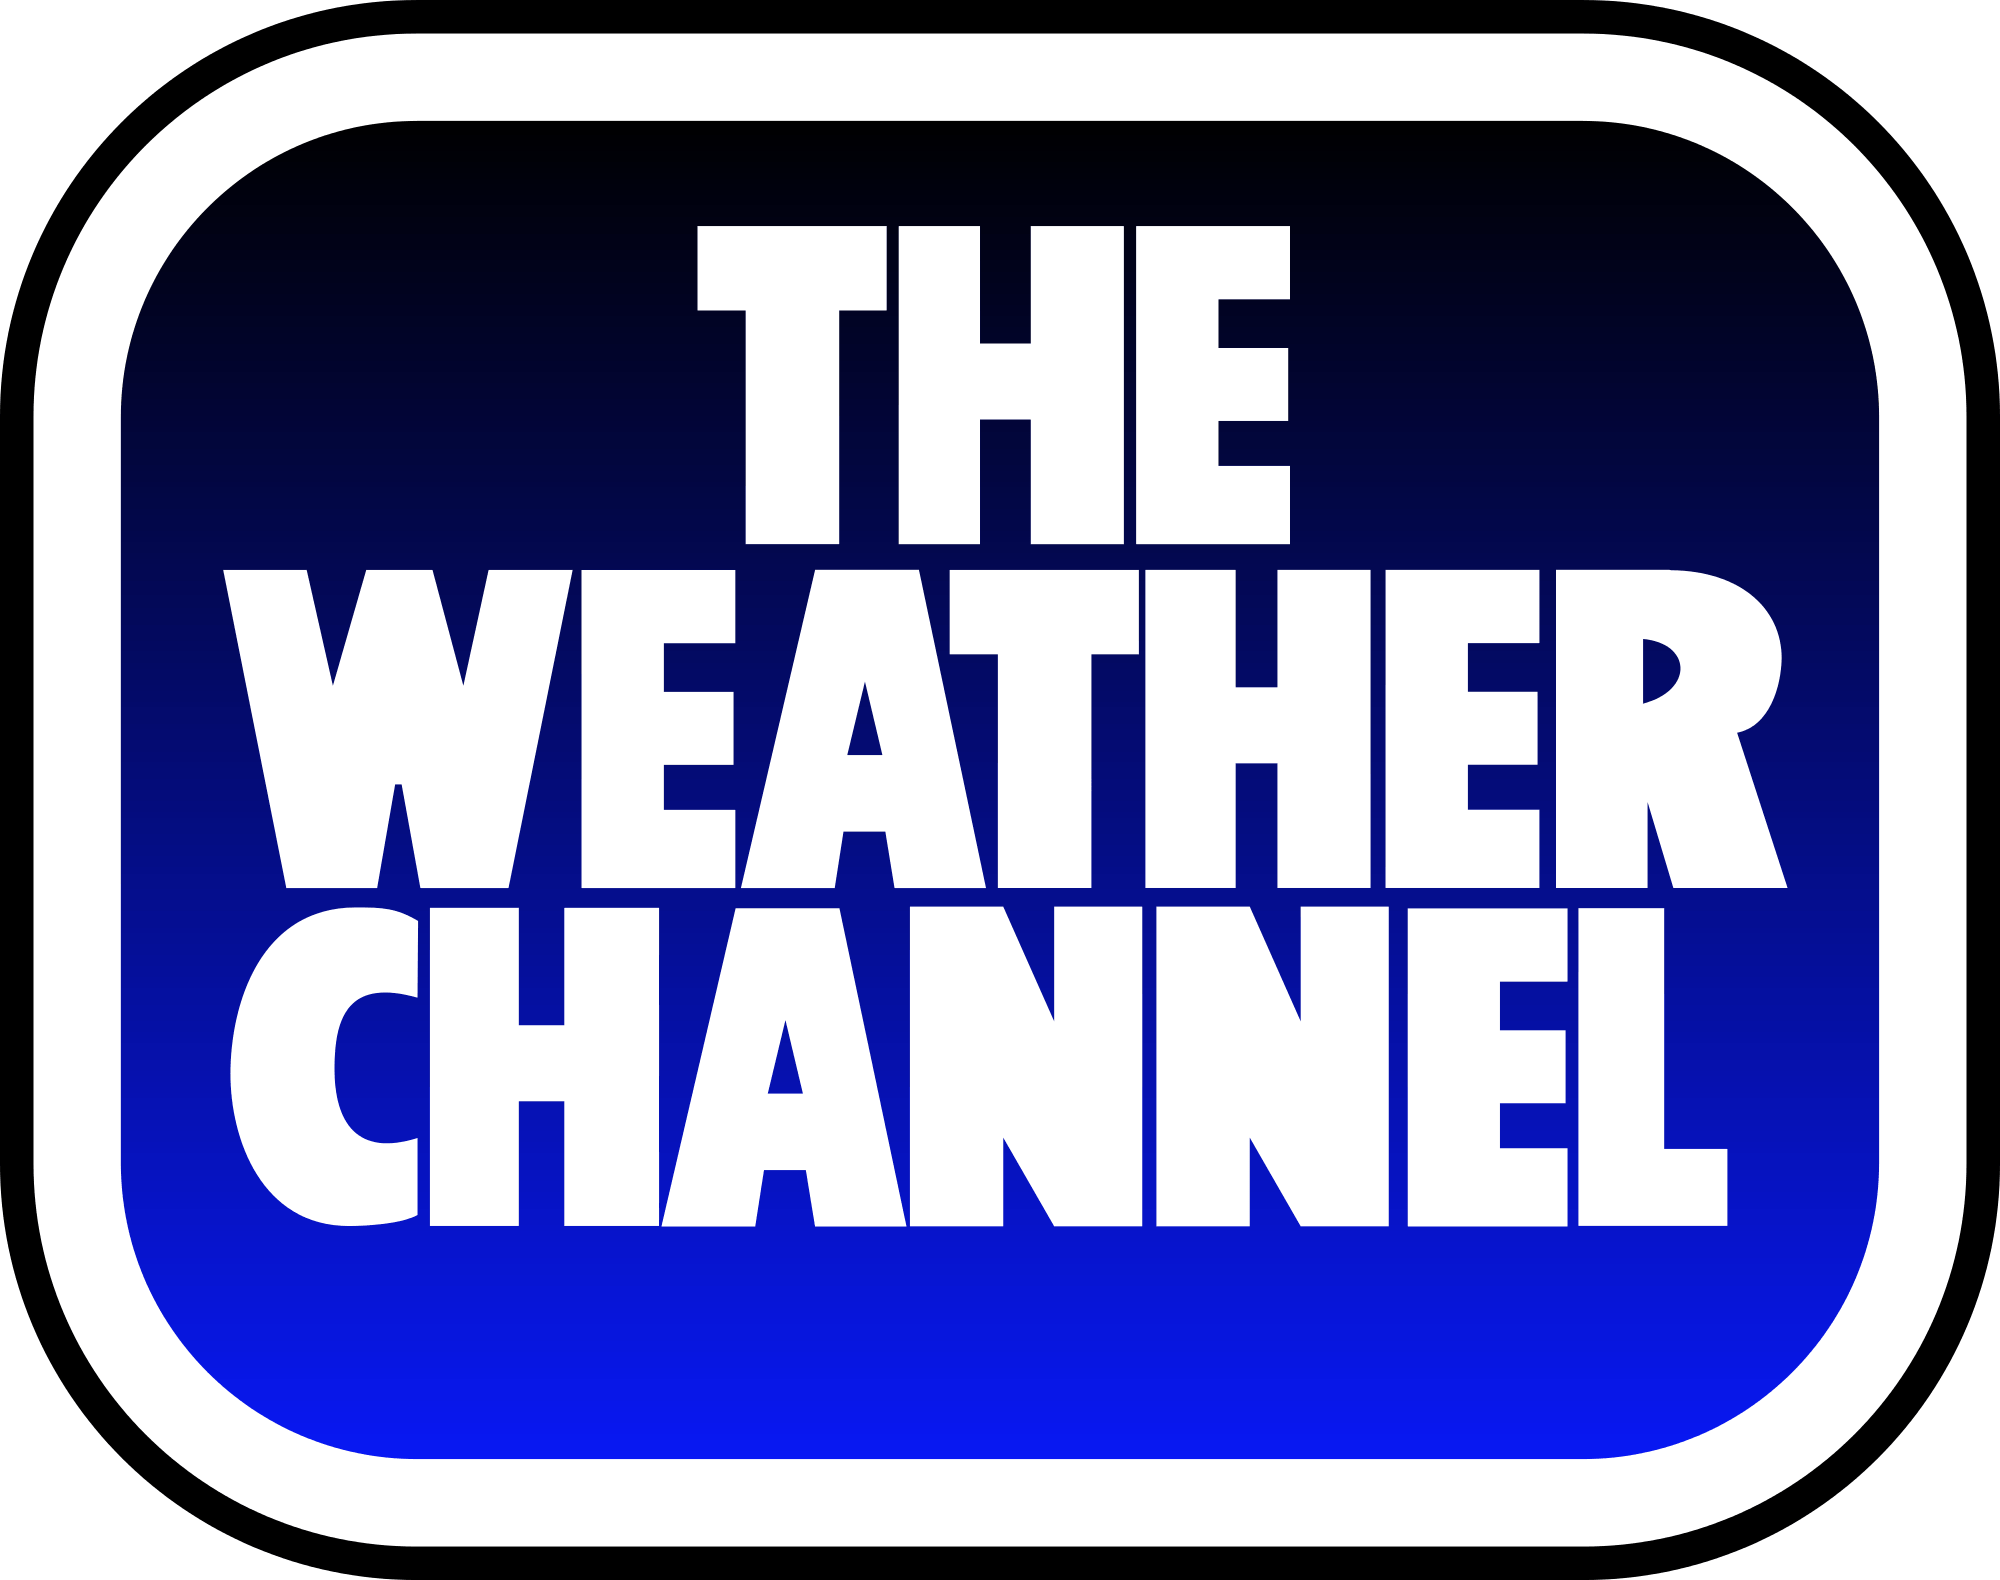 weather channel